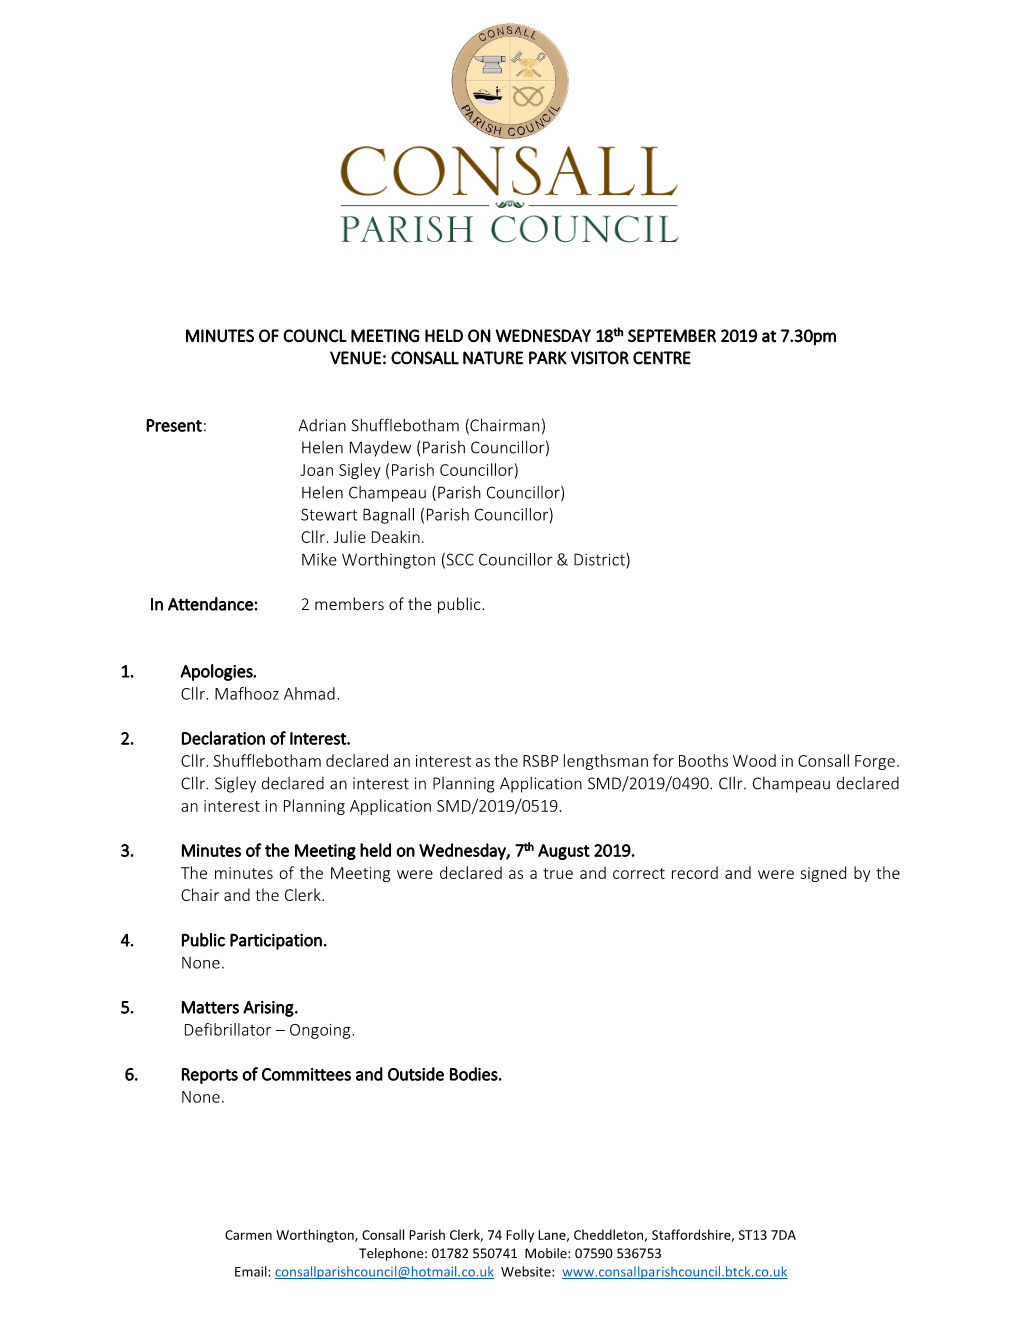 MINUTES of COUNCL MEETING HELD on WEDNESDAY 18Th SEPTEMBER 2019 at 7.30Pm VENUE: CONSALL NATURE PARK VISITOR CENTRE